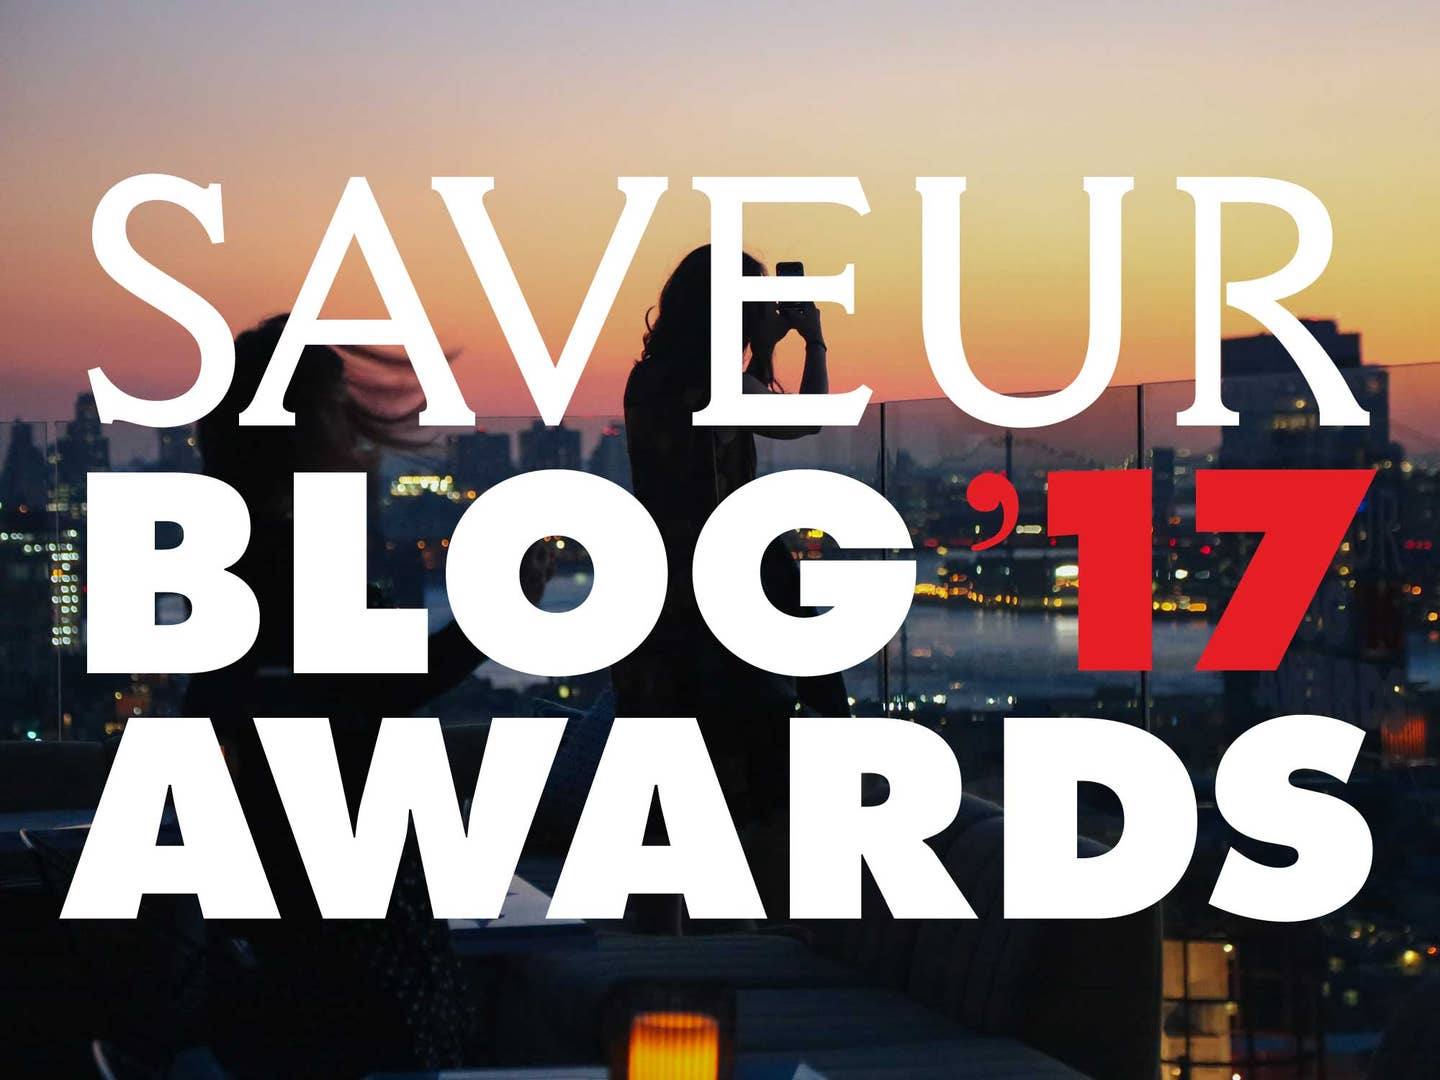 Clone of Vote for Your Favorite Food Blogs in the 2017 Saveur Blog Awards